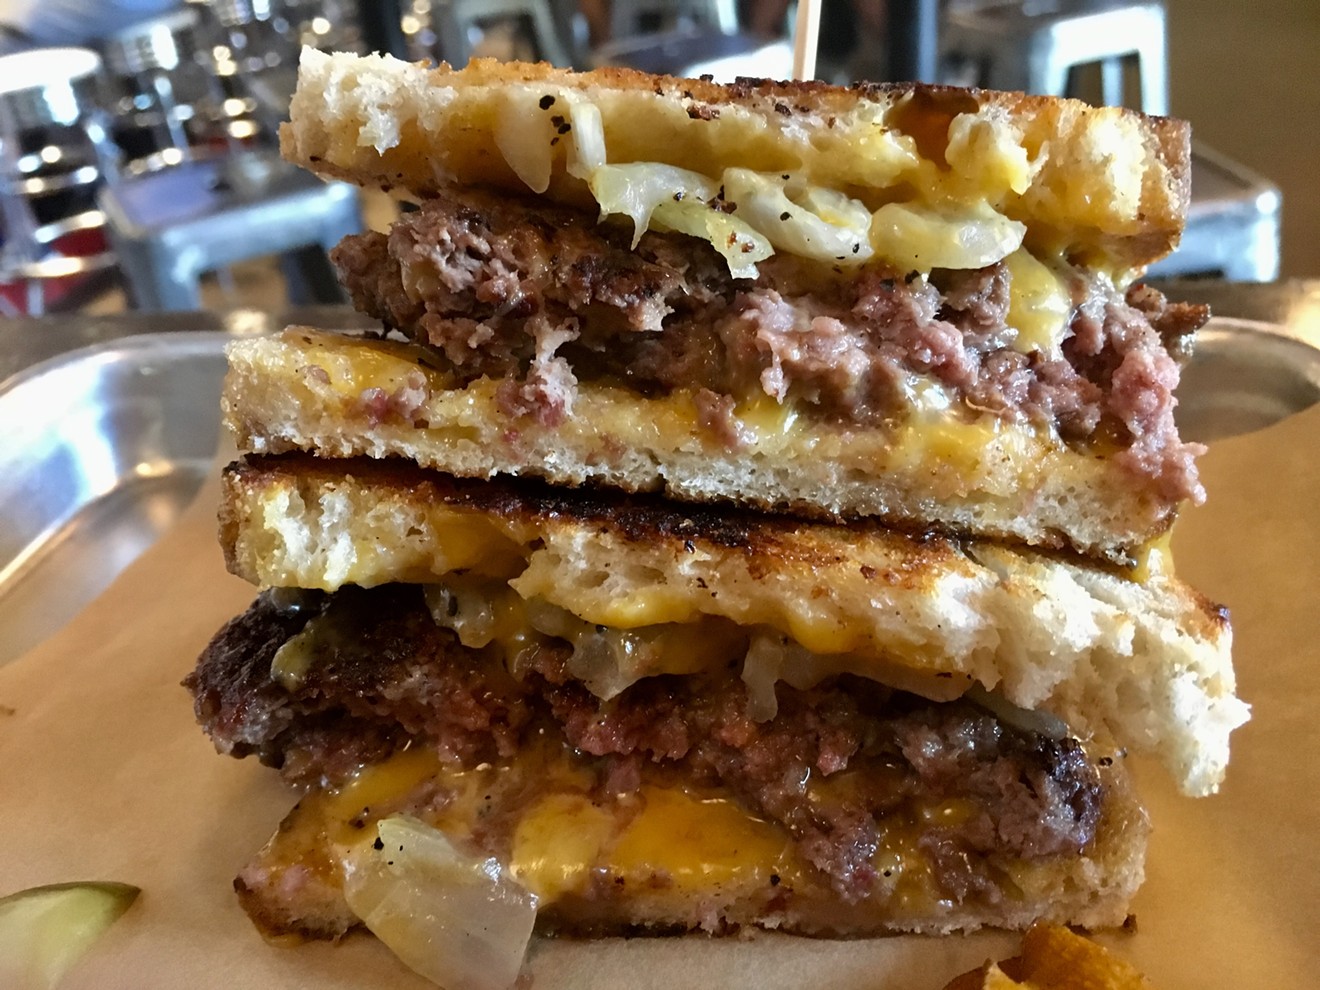 The famous patty melt at the Parlor on Commerce is back, but you'll find it a few blocks away.